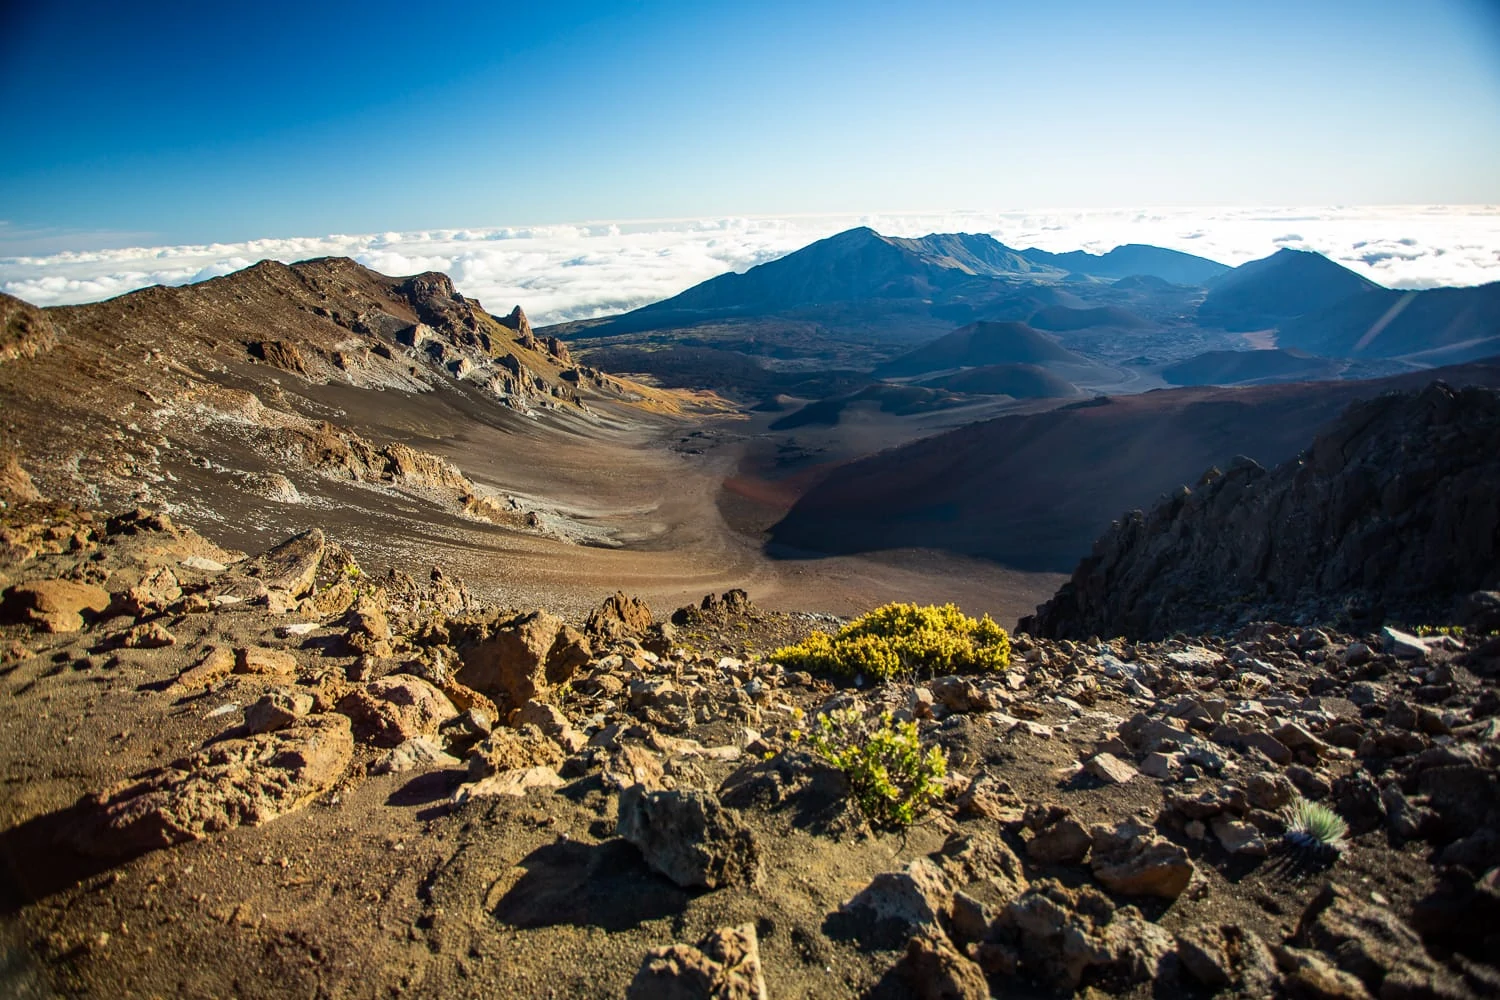 The rocky and surreal landscape at the summit district of Haleakala National Park in Maui, Hawaii.